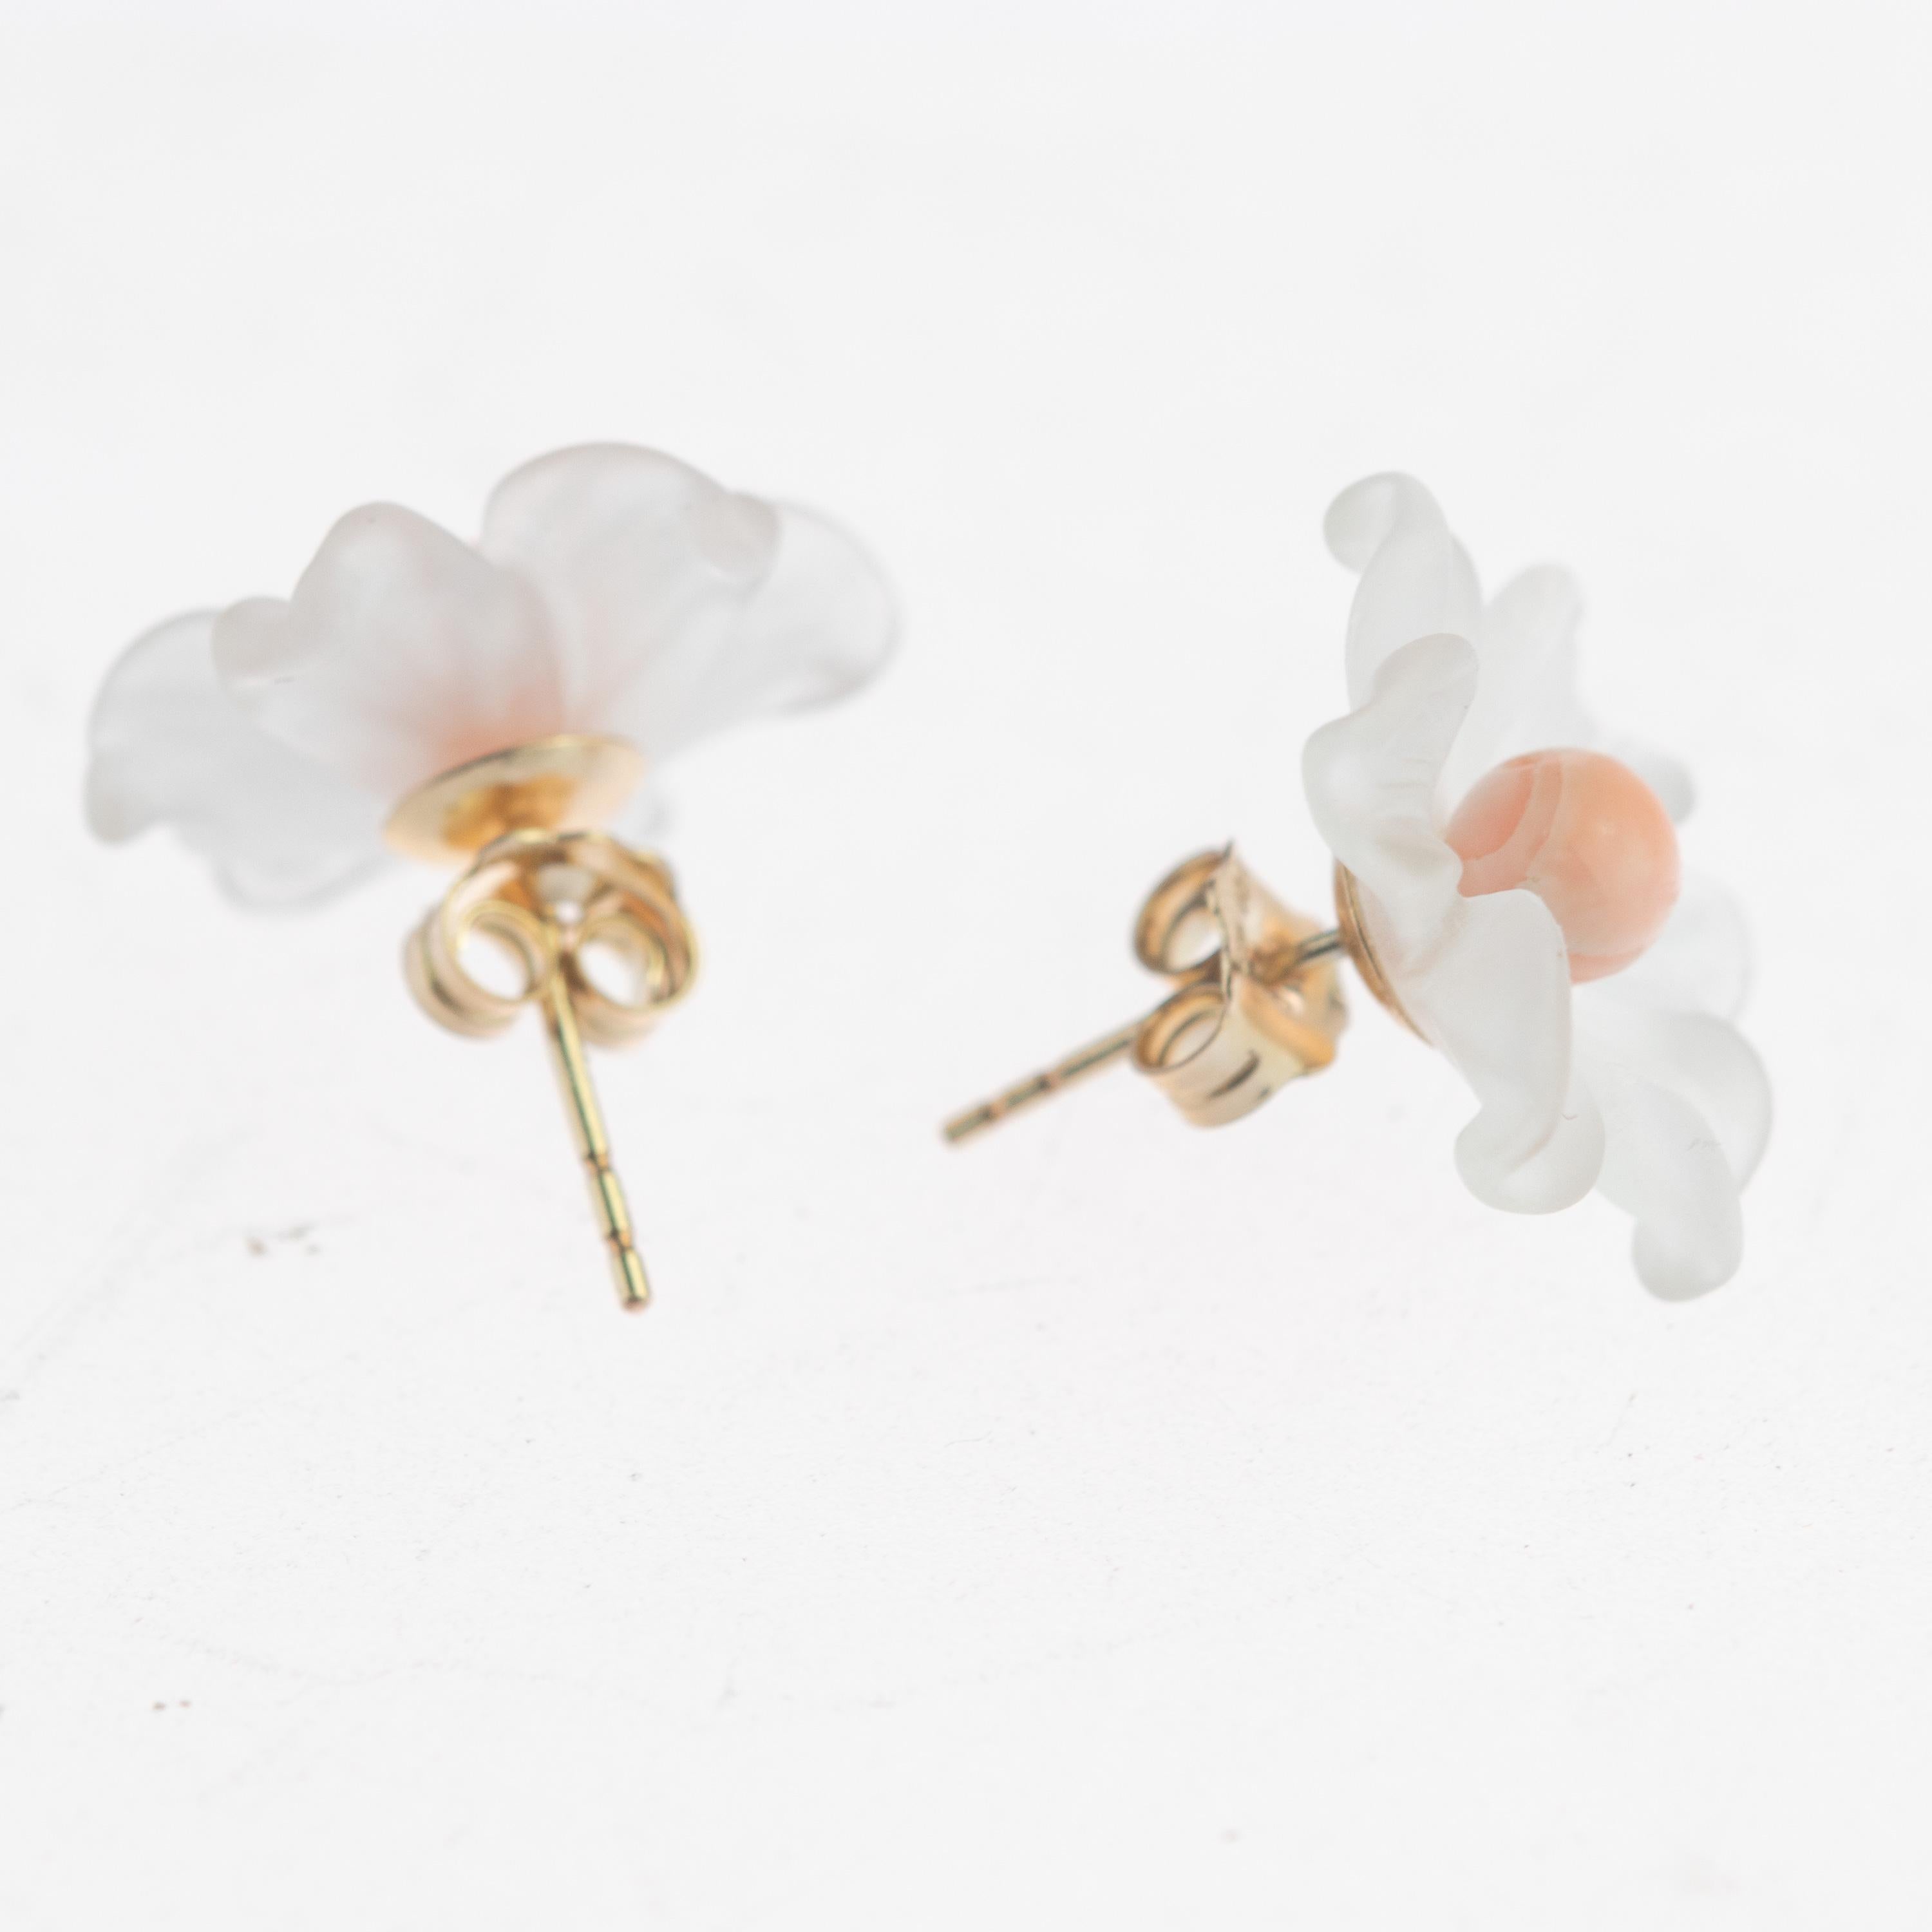 Astonishing and delicate 5.5 ct rock crystal flower. Stud earrings with a coral bead in the middle. Carved petals that evoke the italian handmade traditional jewelry work, wrapping itself in a soft look enriched with  18 Karat gold manifesting